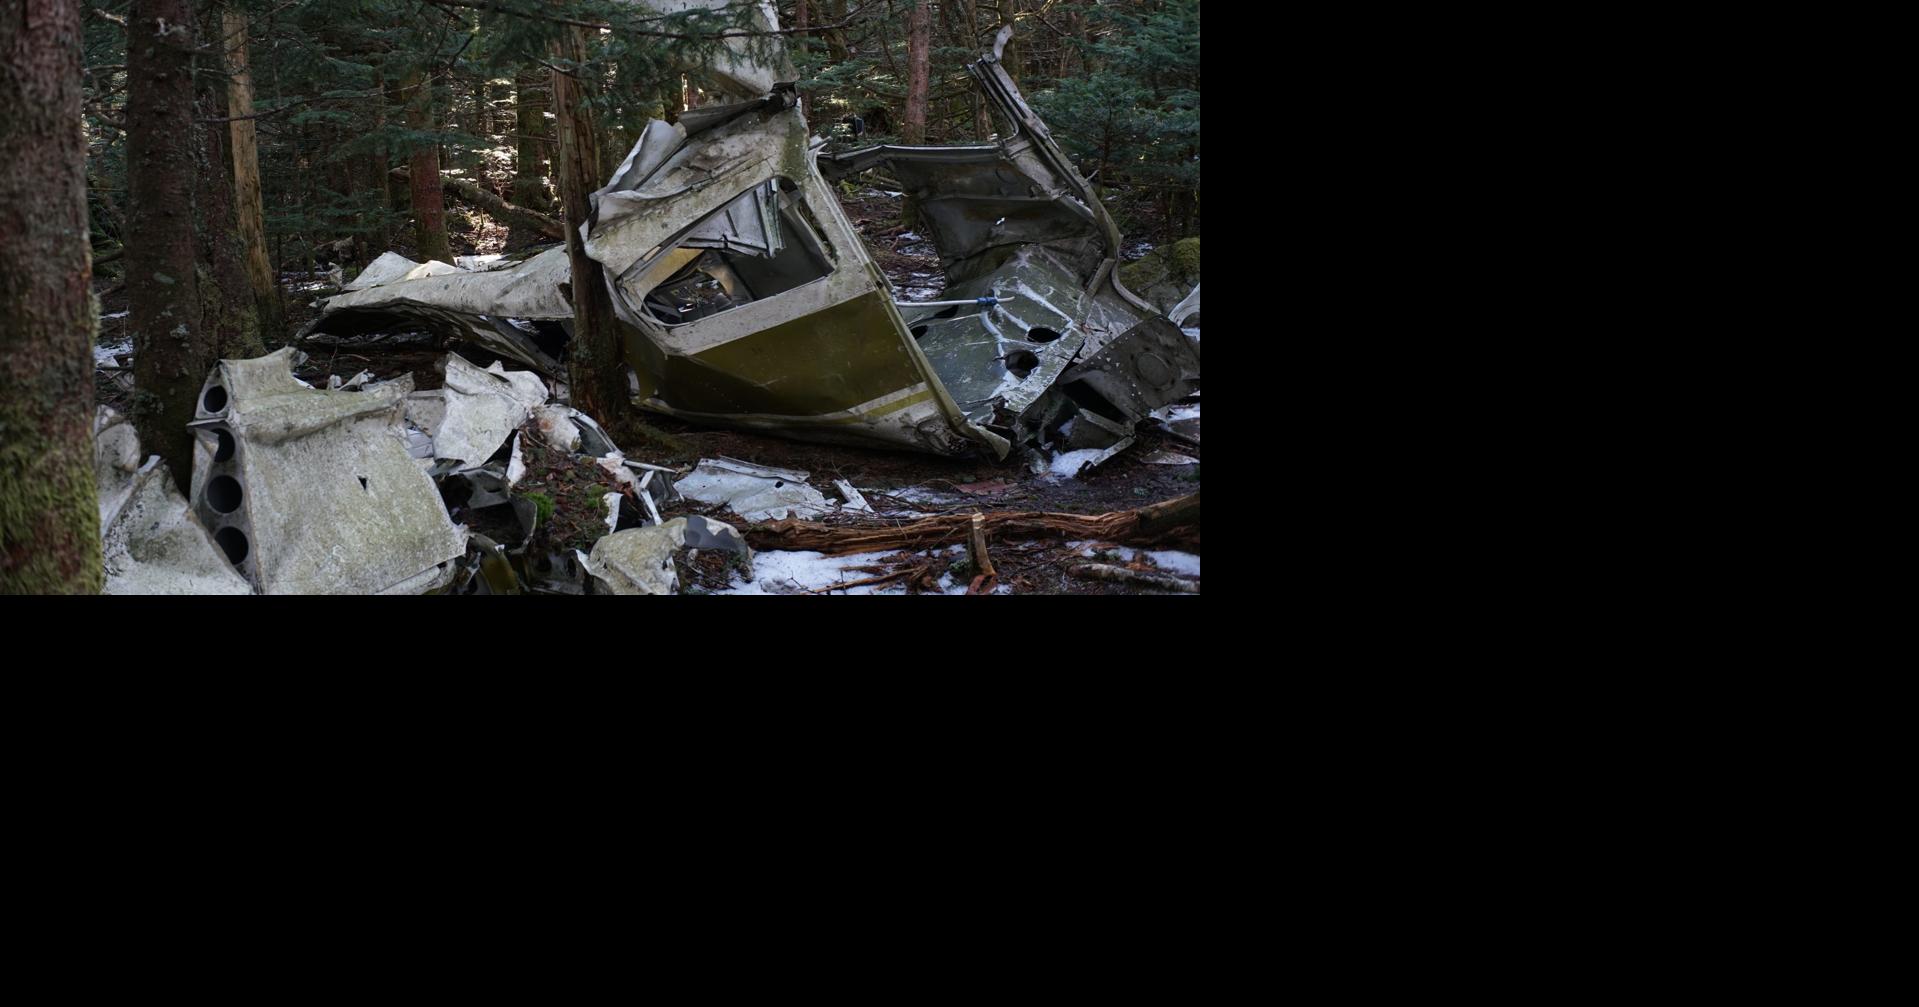 Went hiking at the TWA crash site in the mountains outside